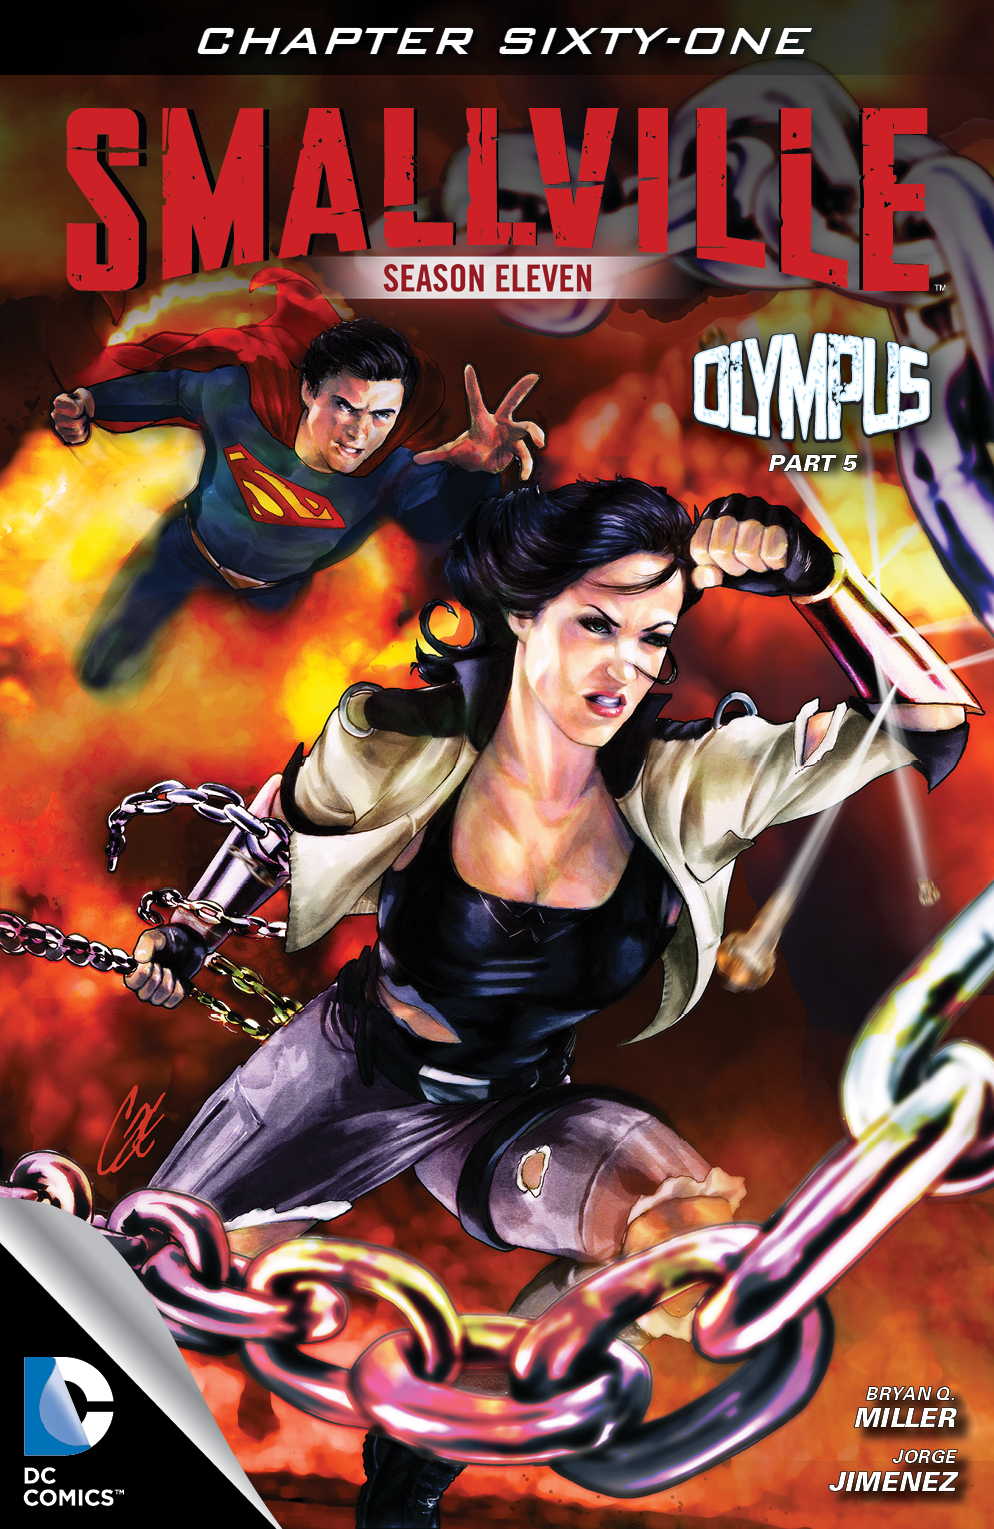 Smallville Season 11 #61 preview images